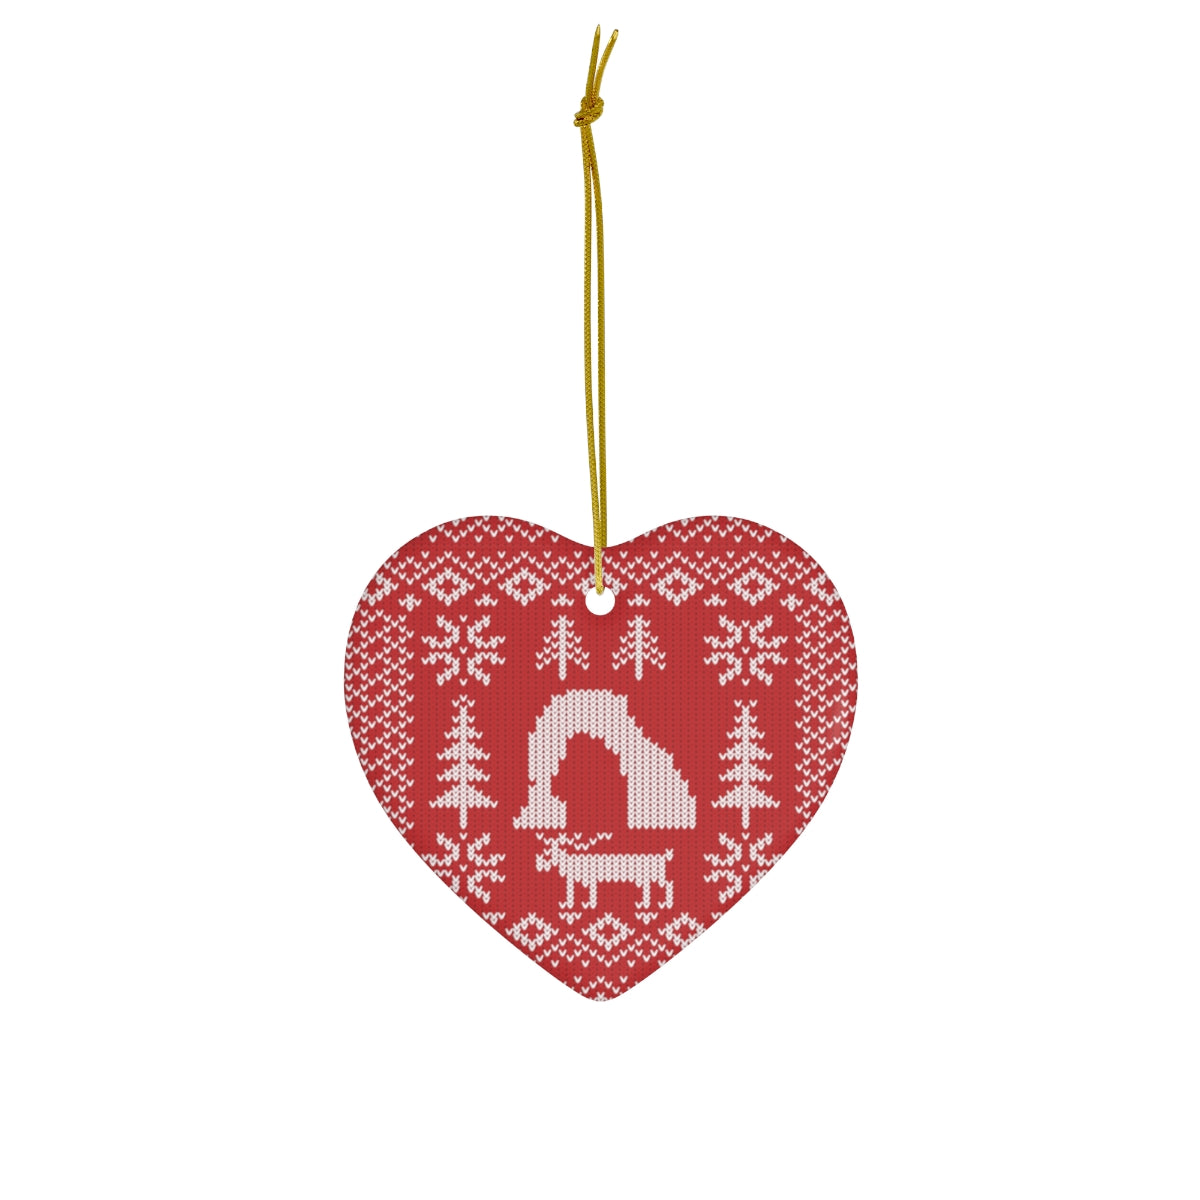 Arches National Park Ornament - Delicate Arch Fair Isle Pattern